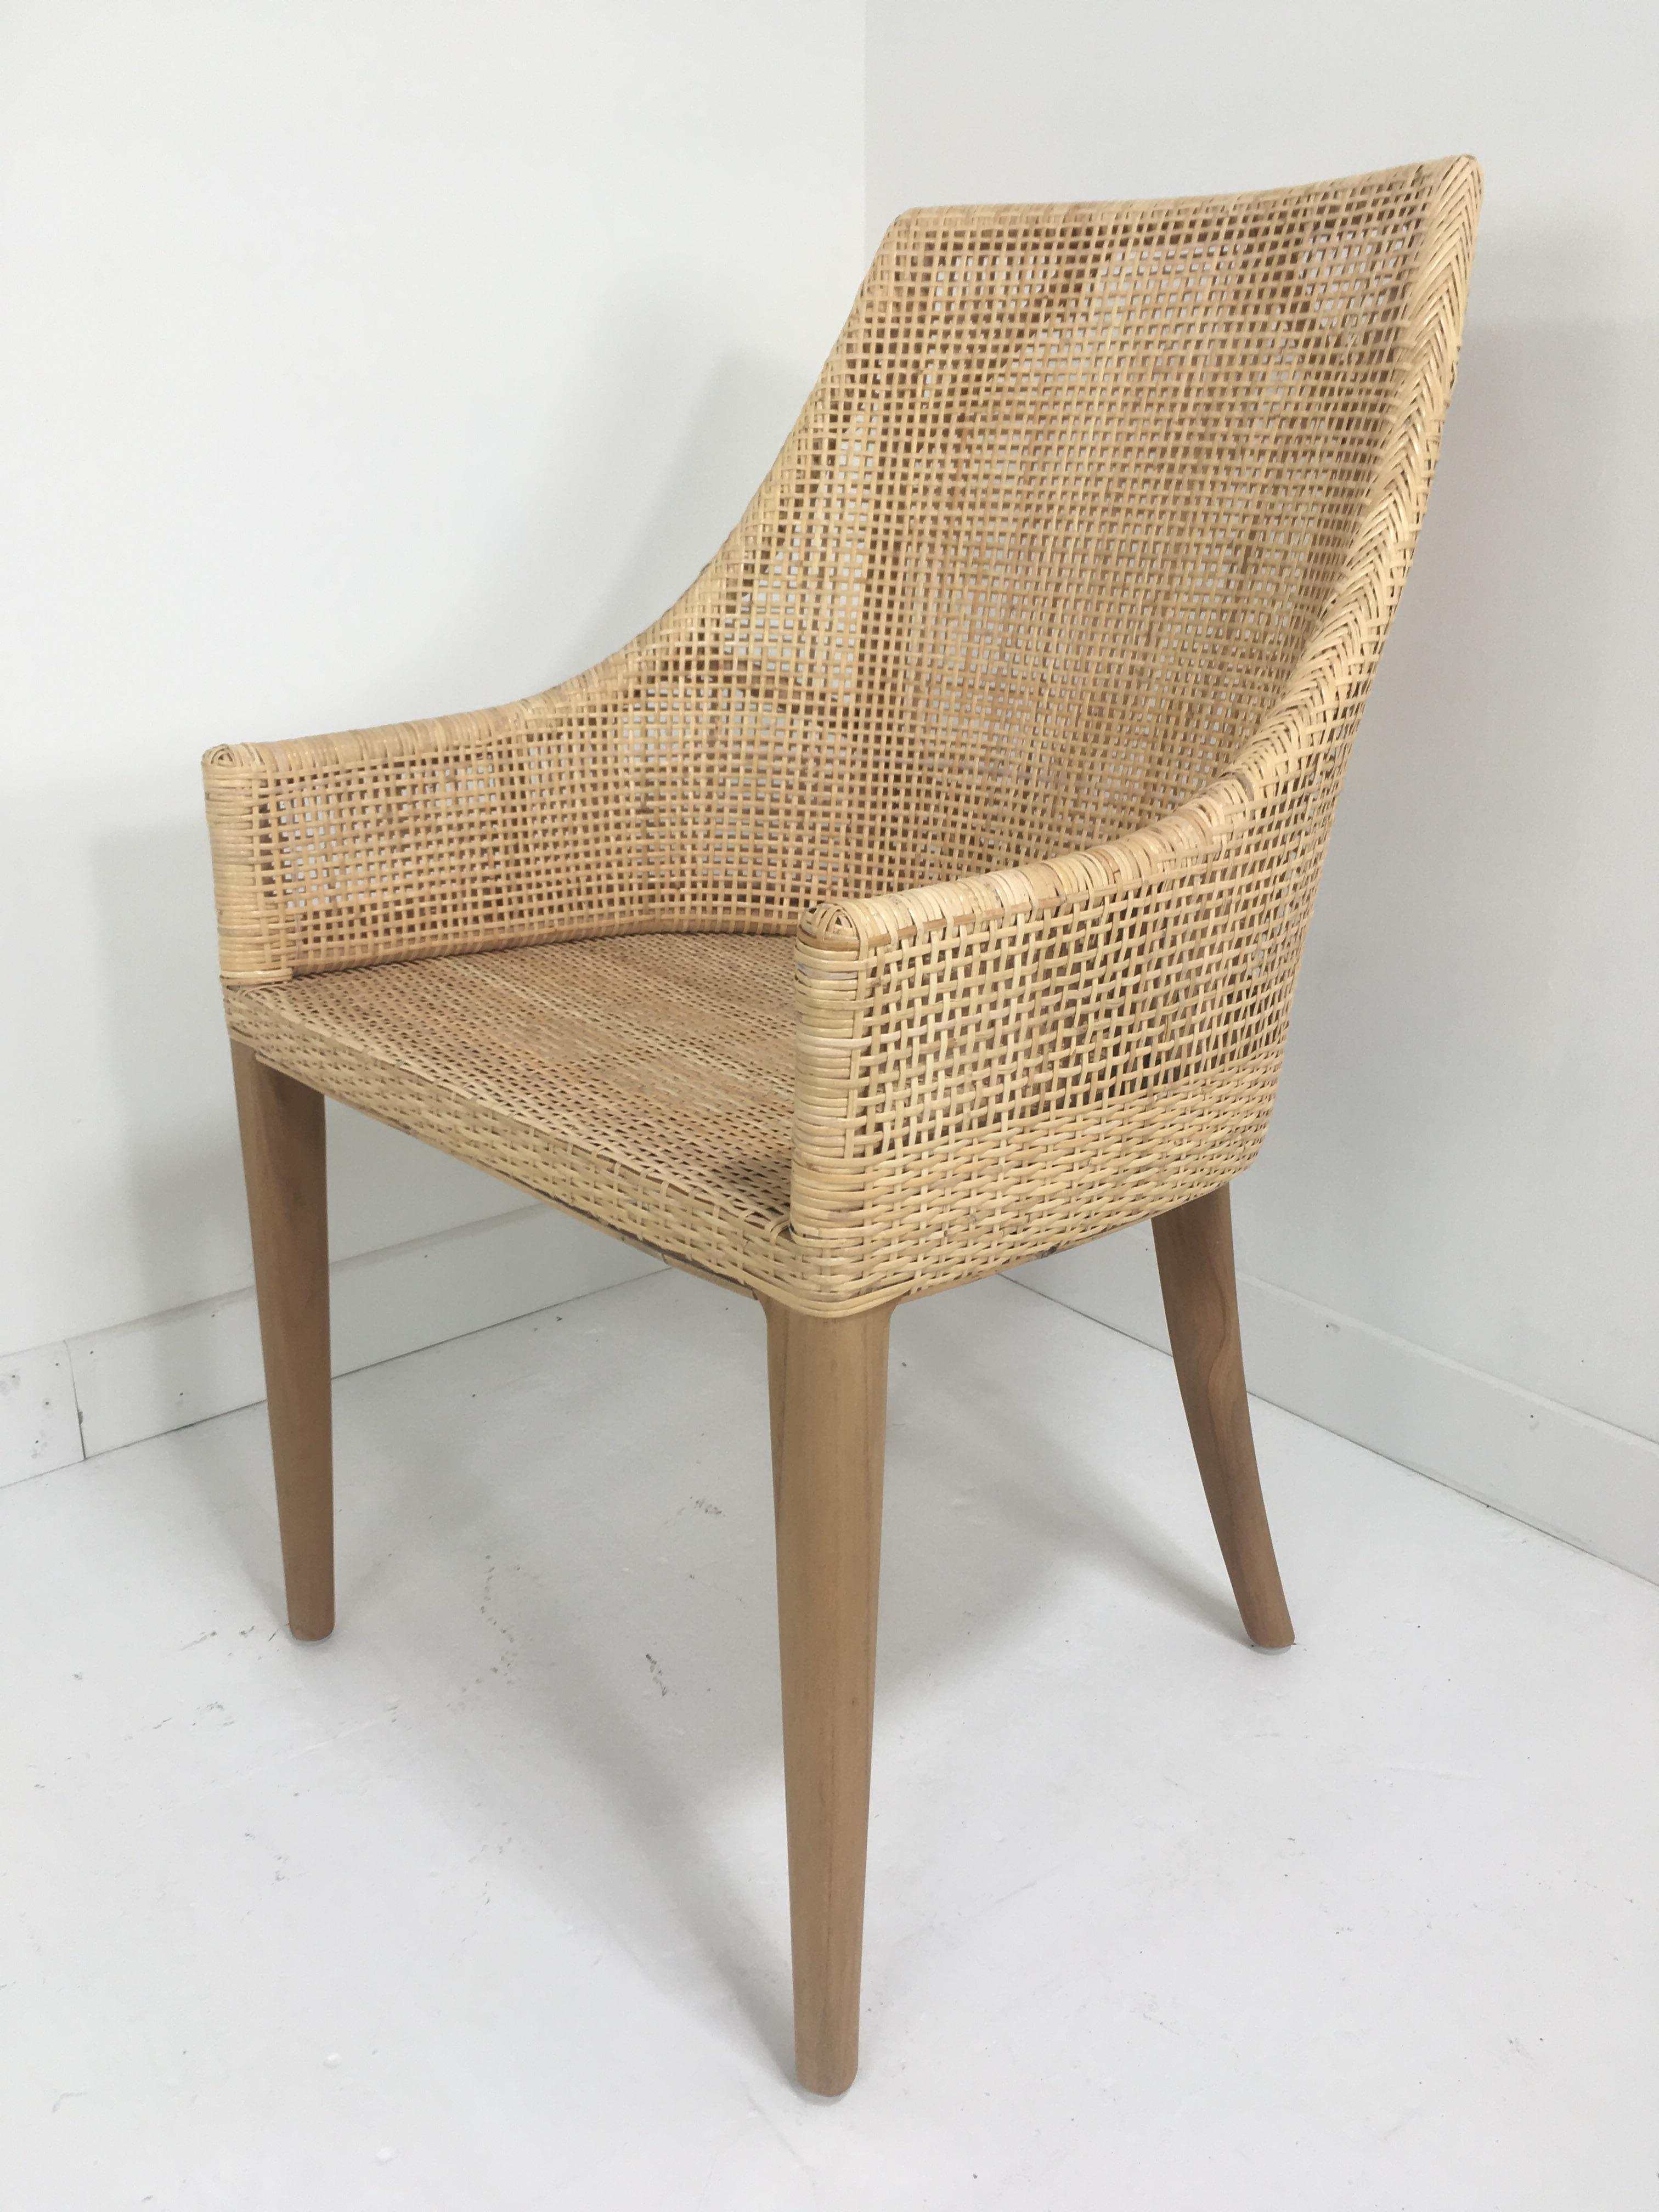 Elegant set of six rattan armchairs with teak wooden feet and handcrafted braided rattan seat combining quality, robustness and class. They will be perfect on your terrace, in your veranda, your winter garden, around the dining table and even in